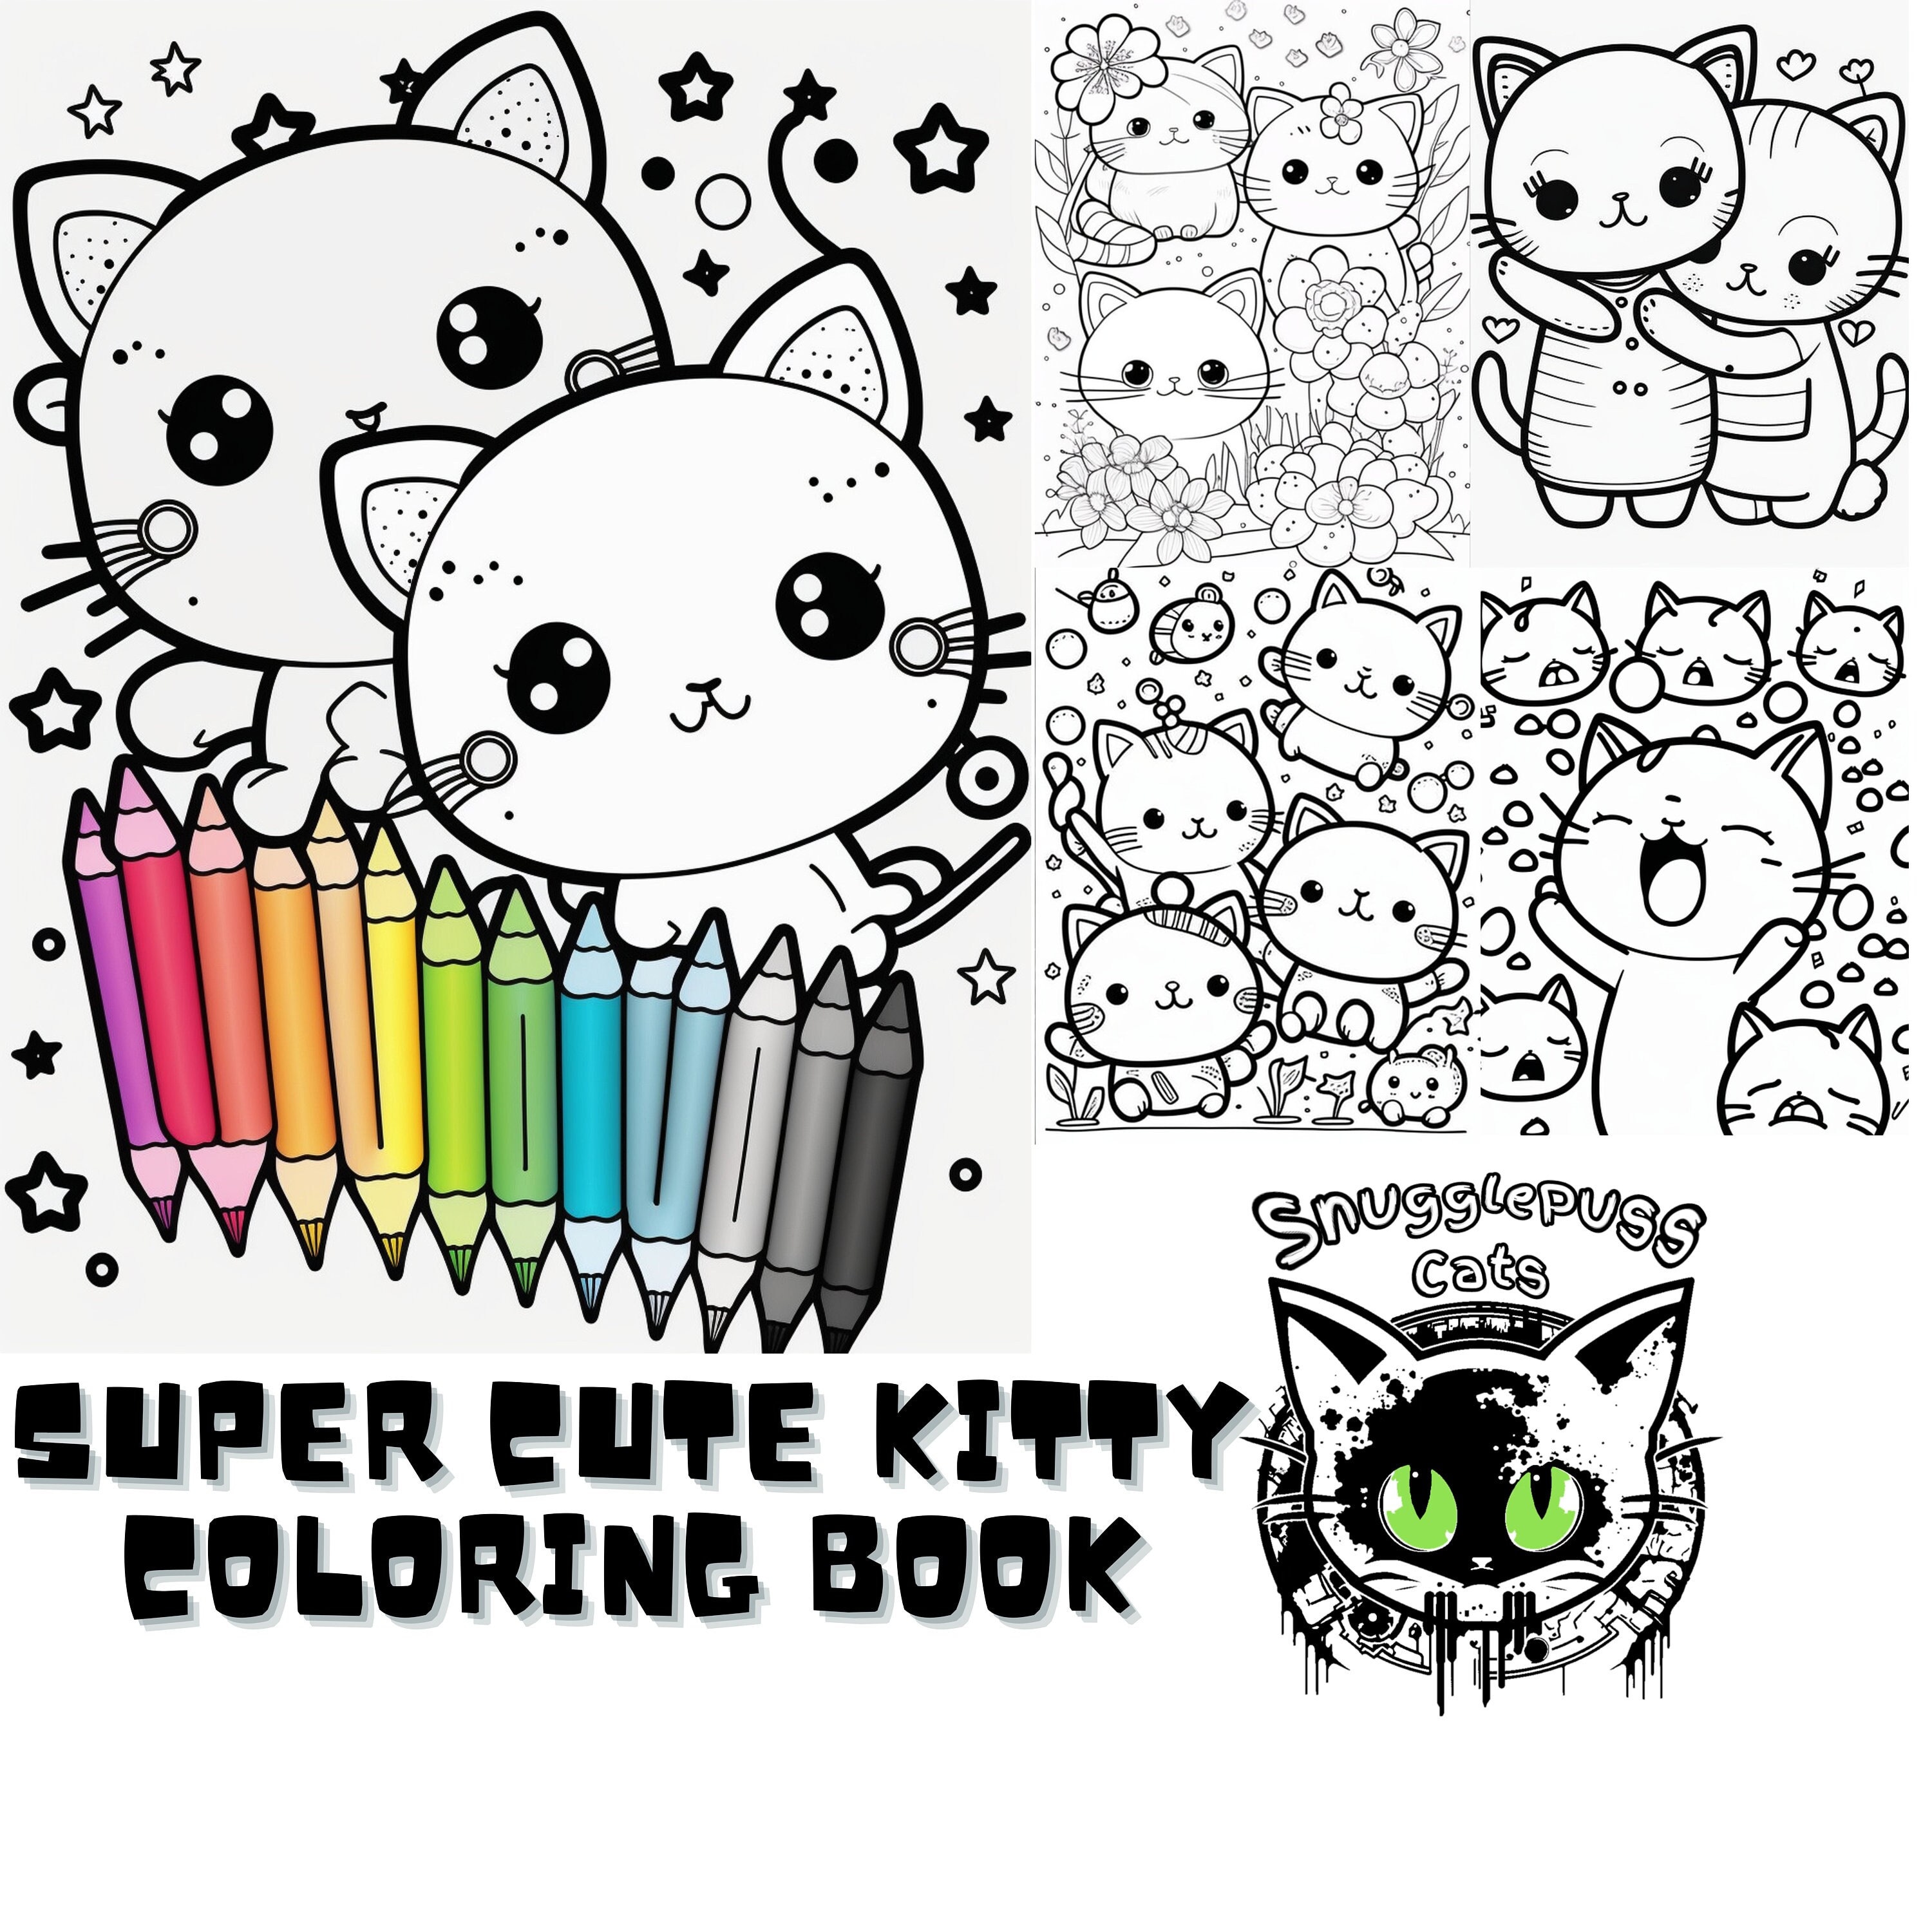 Super cute kitty coloring book snuggle kitty instant digital